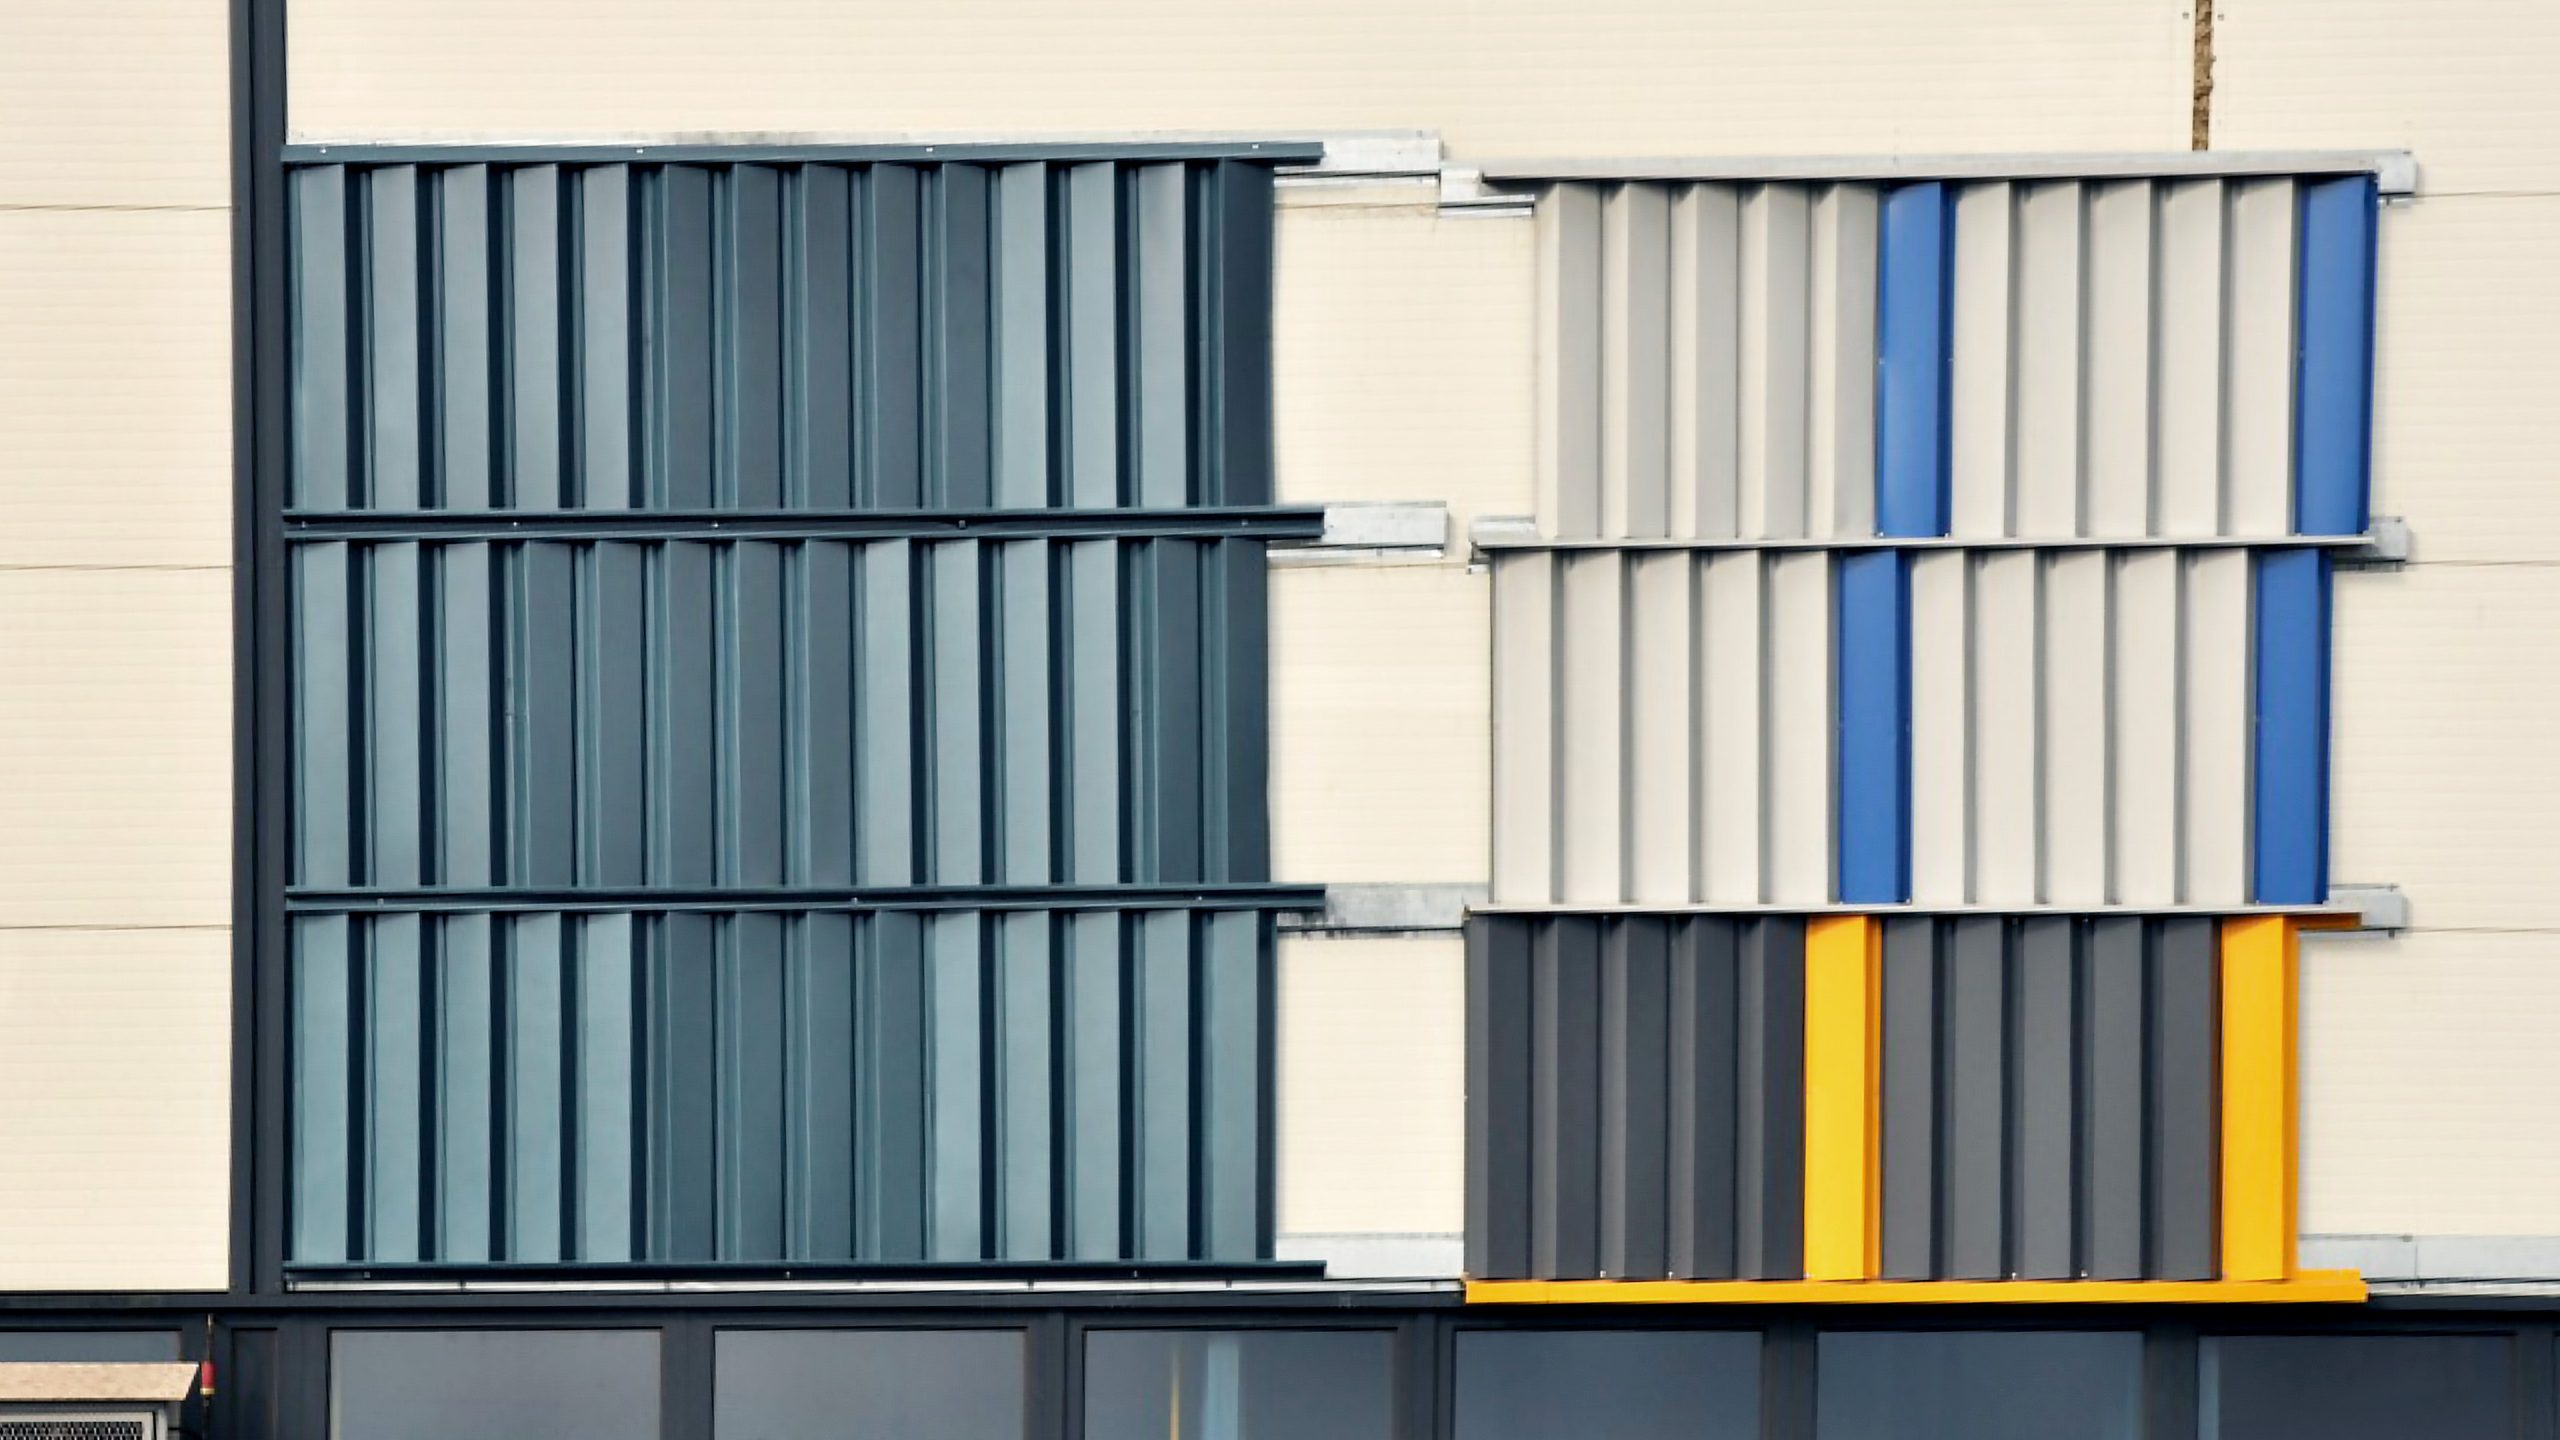 The colours of prefabricated facade panels are easy to check.